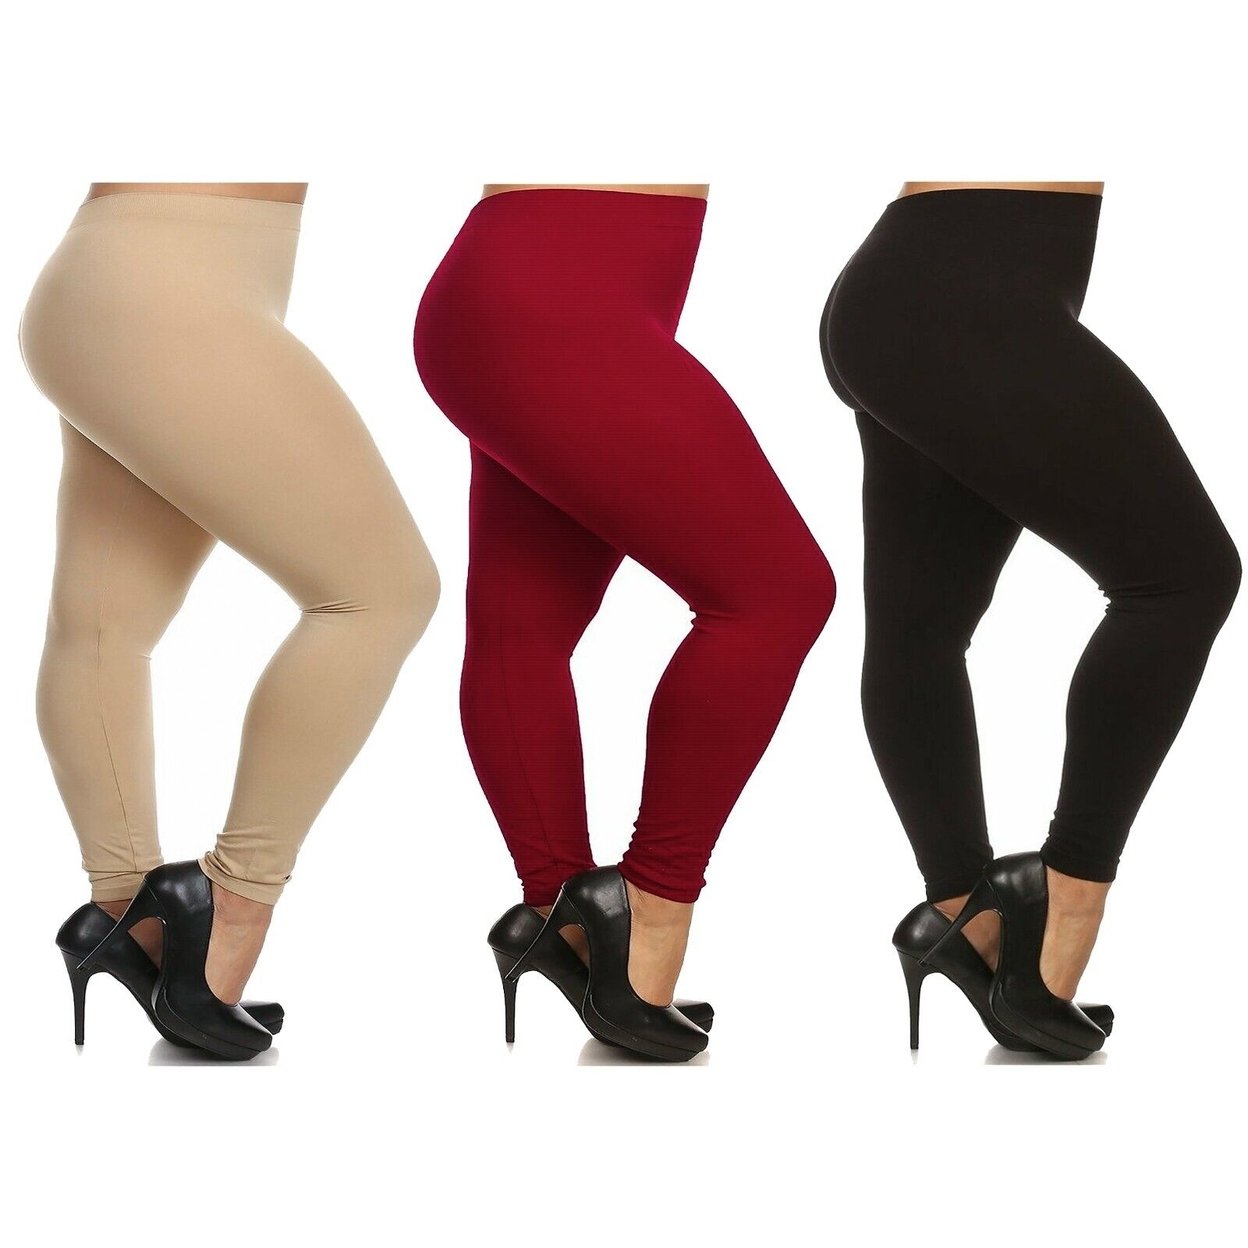 3-Pack: Women's Casual Ultra-Soft Smooth High Waisted Athletic Active Yoga Leggings Plus Size Available - Beige,beige,beige, 1x